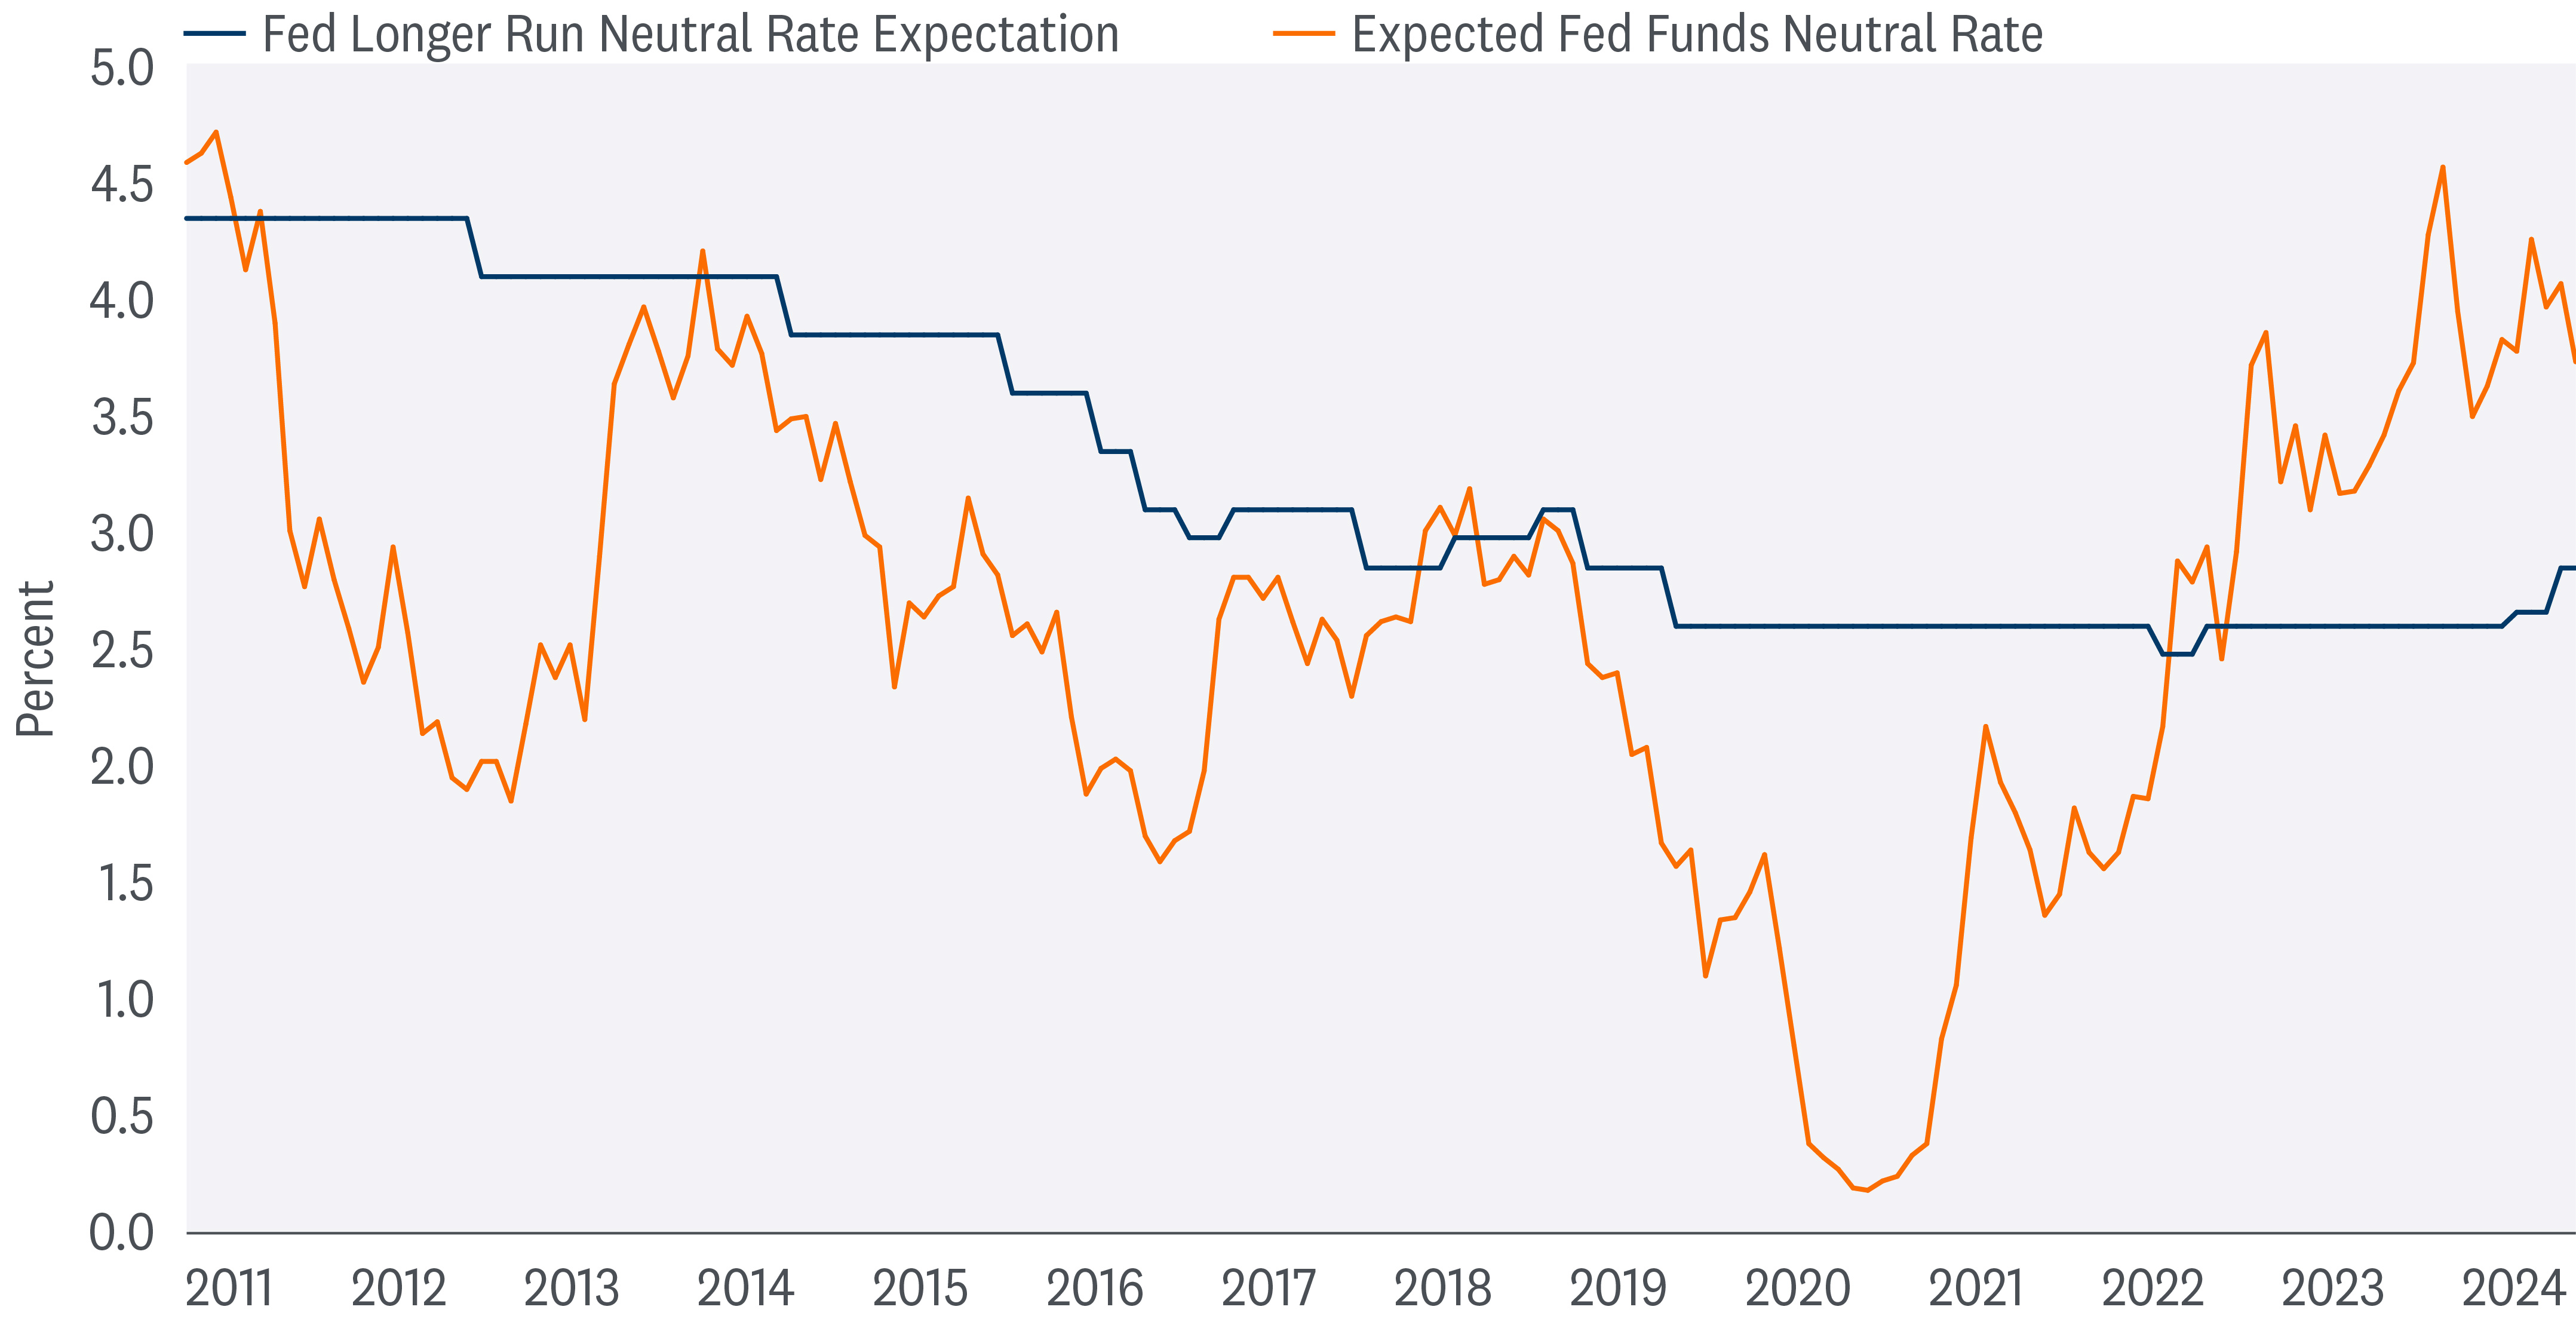 The chart shows the Federal Reserve's longer run neutral rate expectation and the expected Fed funds neutral rate from 2011 to 2024.